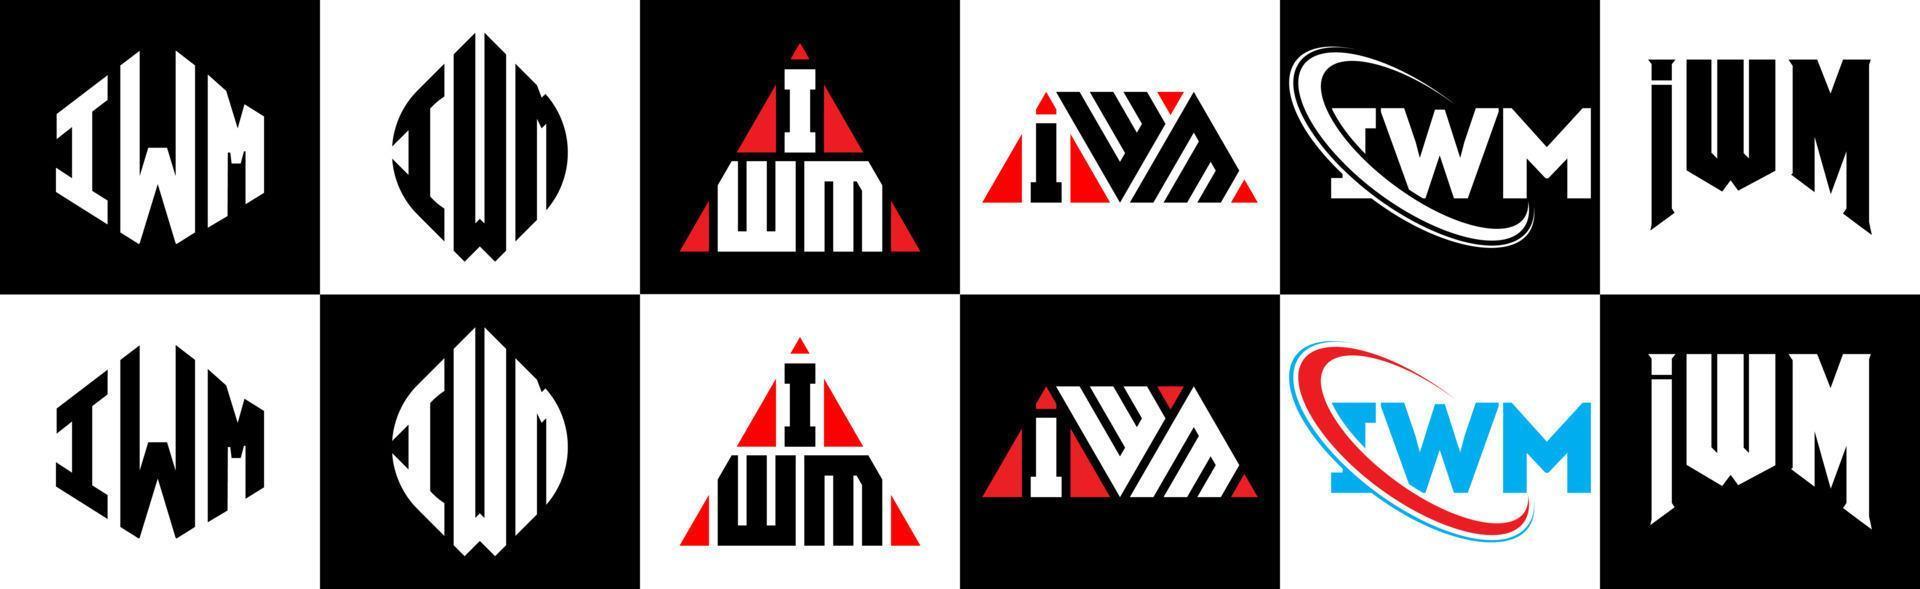 IWM letter logo design in six style. IWM polygon, circle, triangle, hexagon, flat and simple style with black and white color variation letter logo set in one artboard. IWM minimalist and classic logo vector